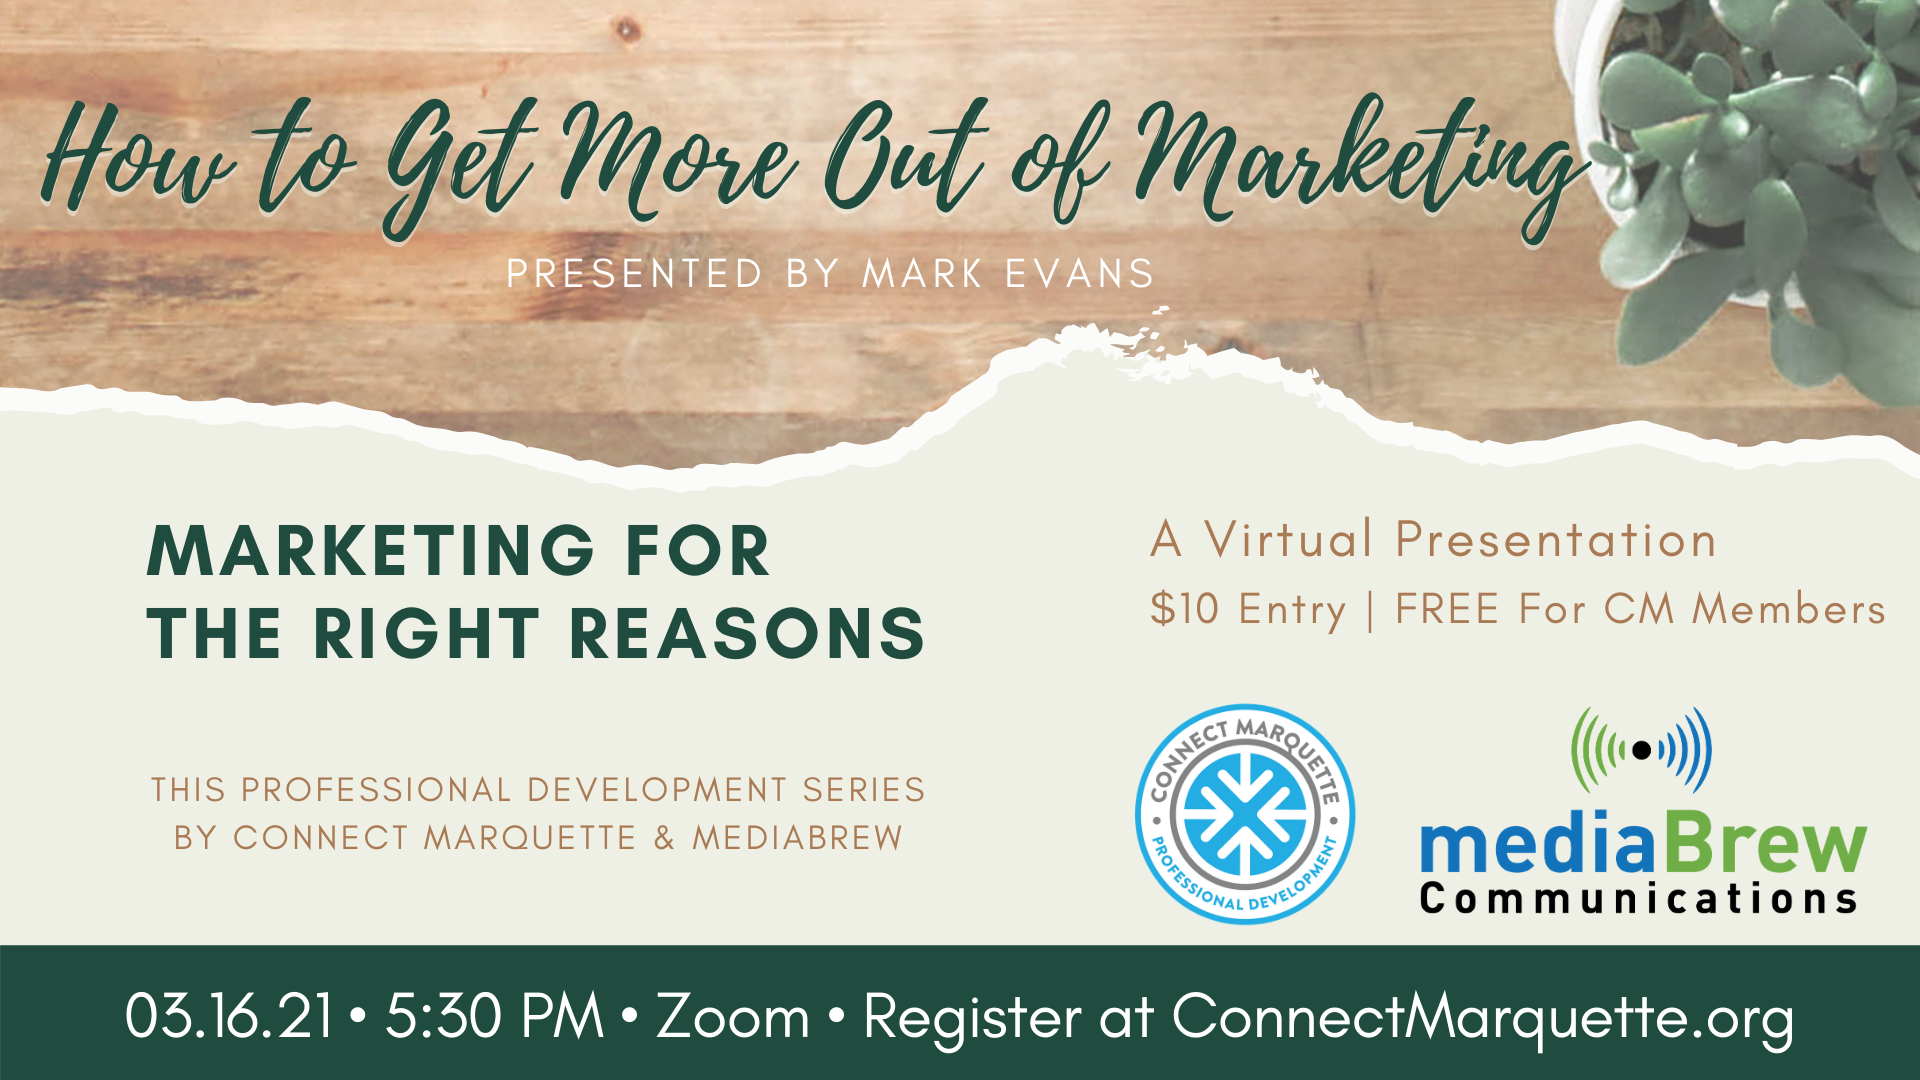 Attend How to Get More Out of Marketing presented by Mark Evans of mediaBrew Communications